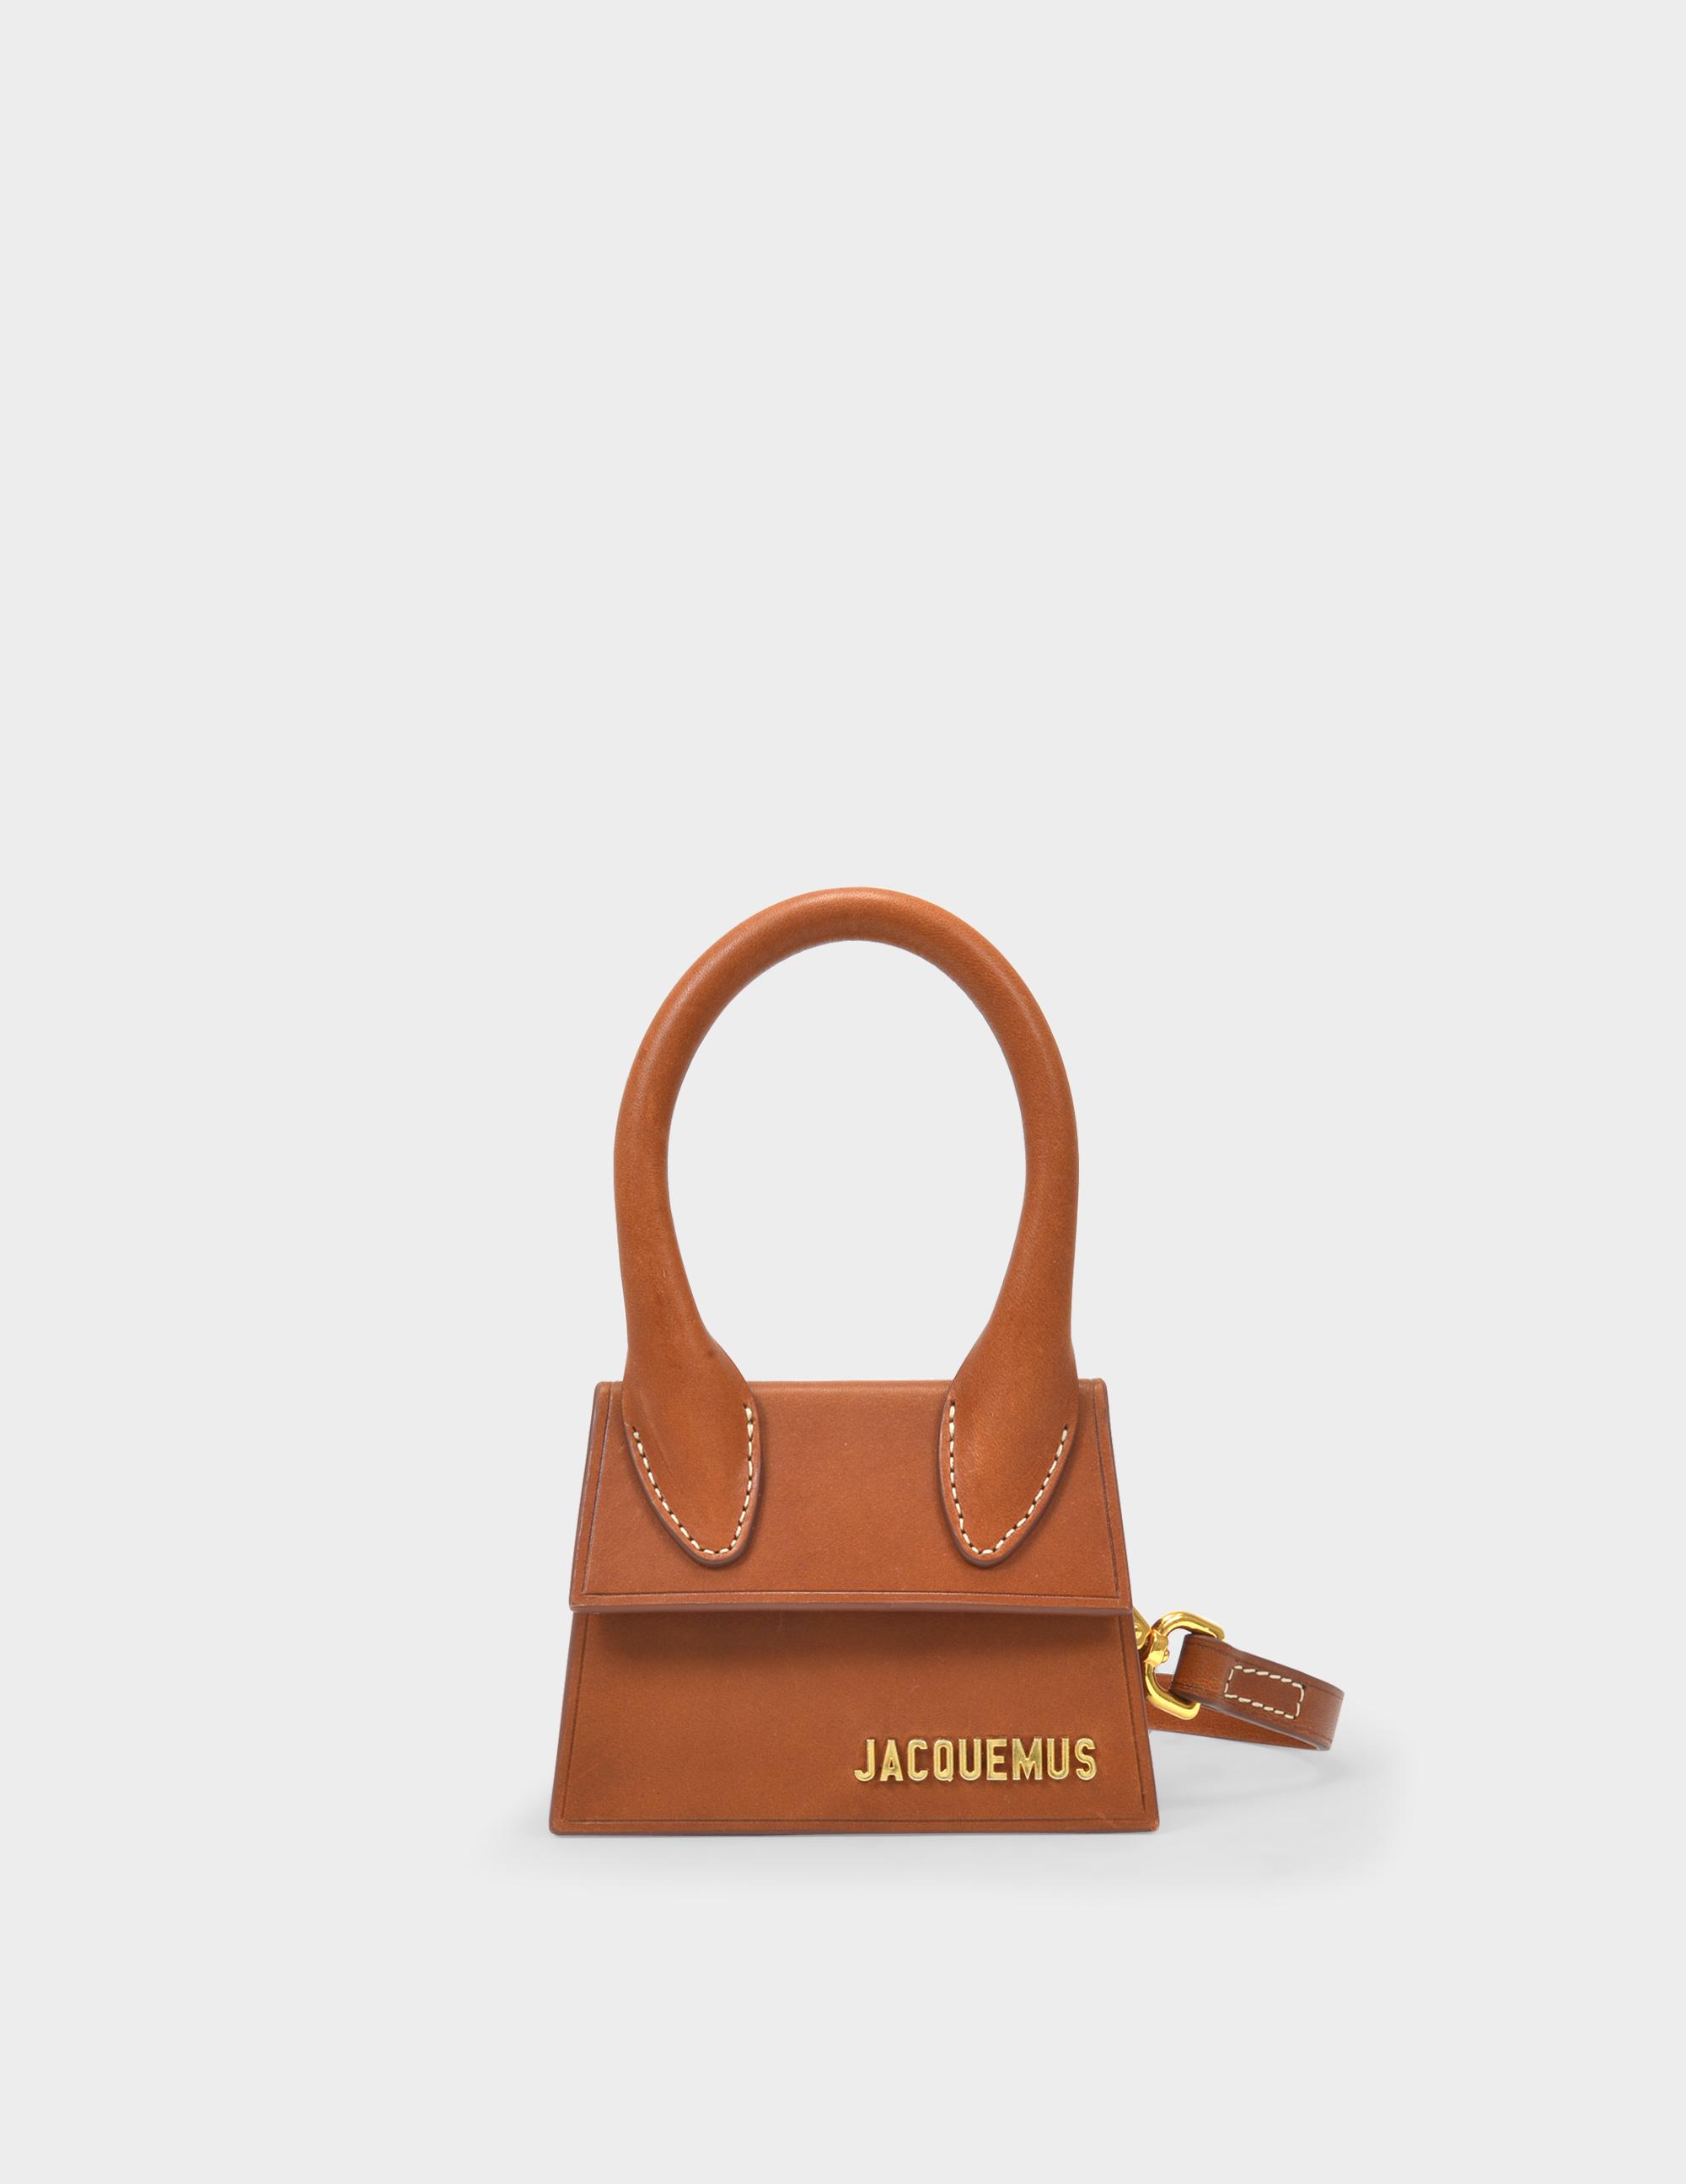 Jacquemus Le Chiquito Bag In Brown Leather | Lyst Canada